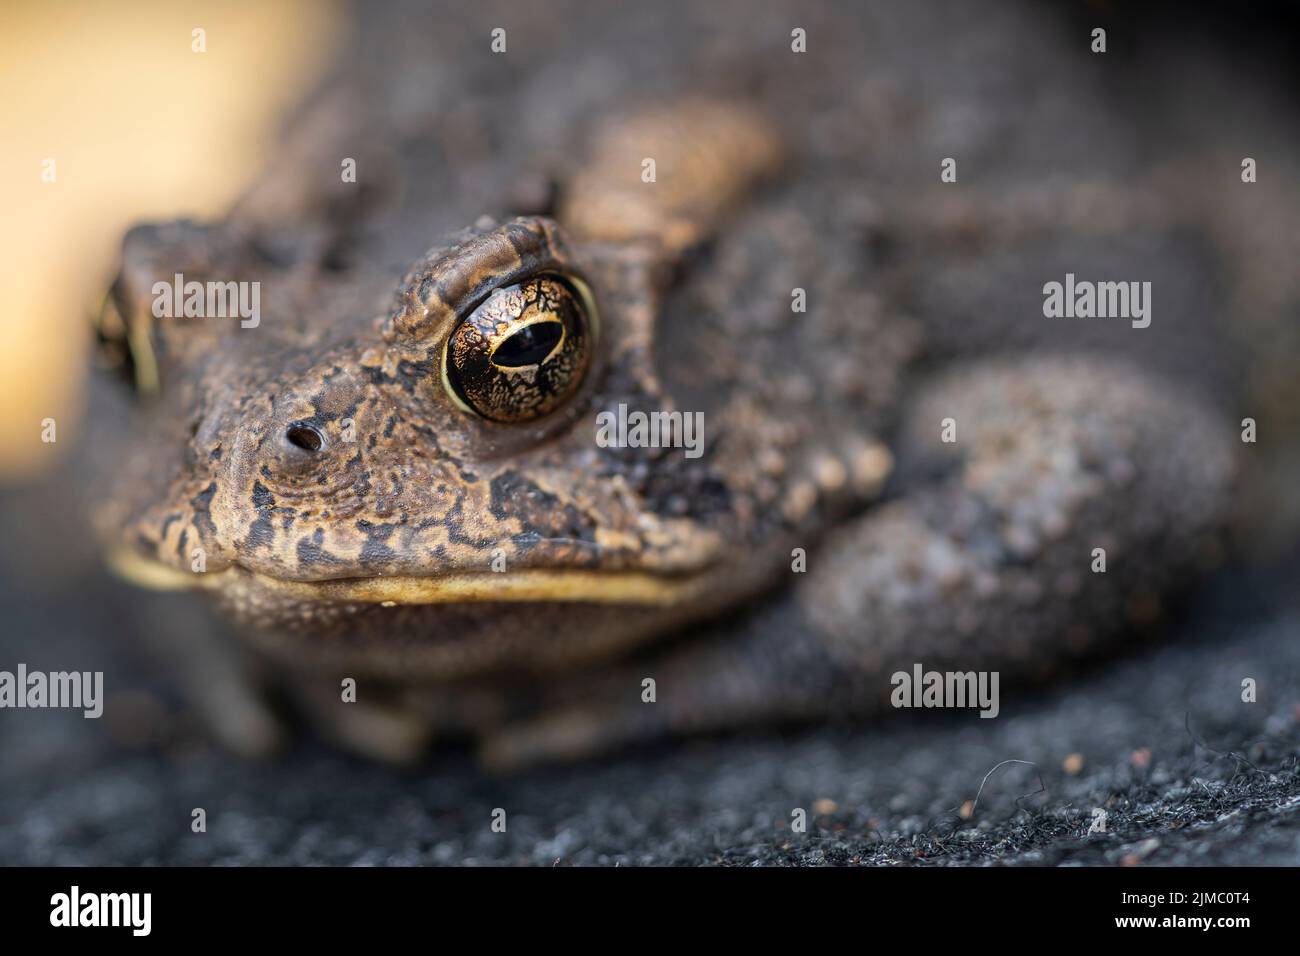 A common American toad with brown bumpy skin and large glassy eyes peacefully rests on a grey carpet. Stock Photo